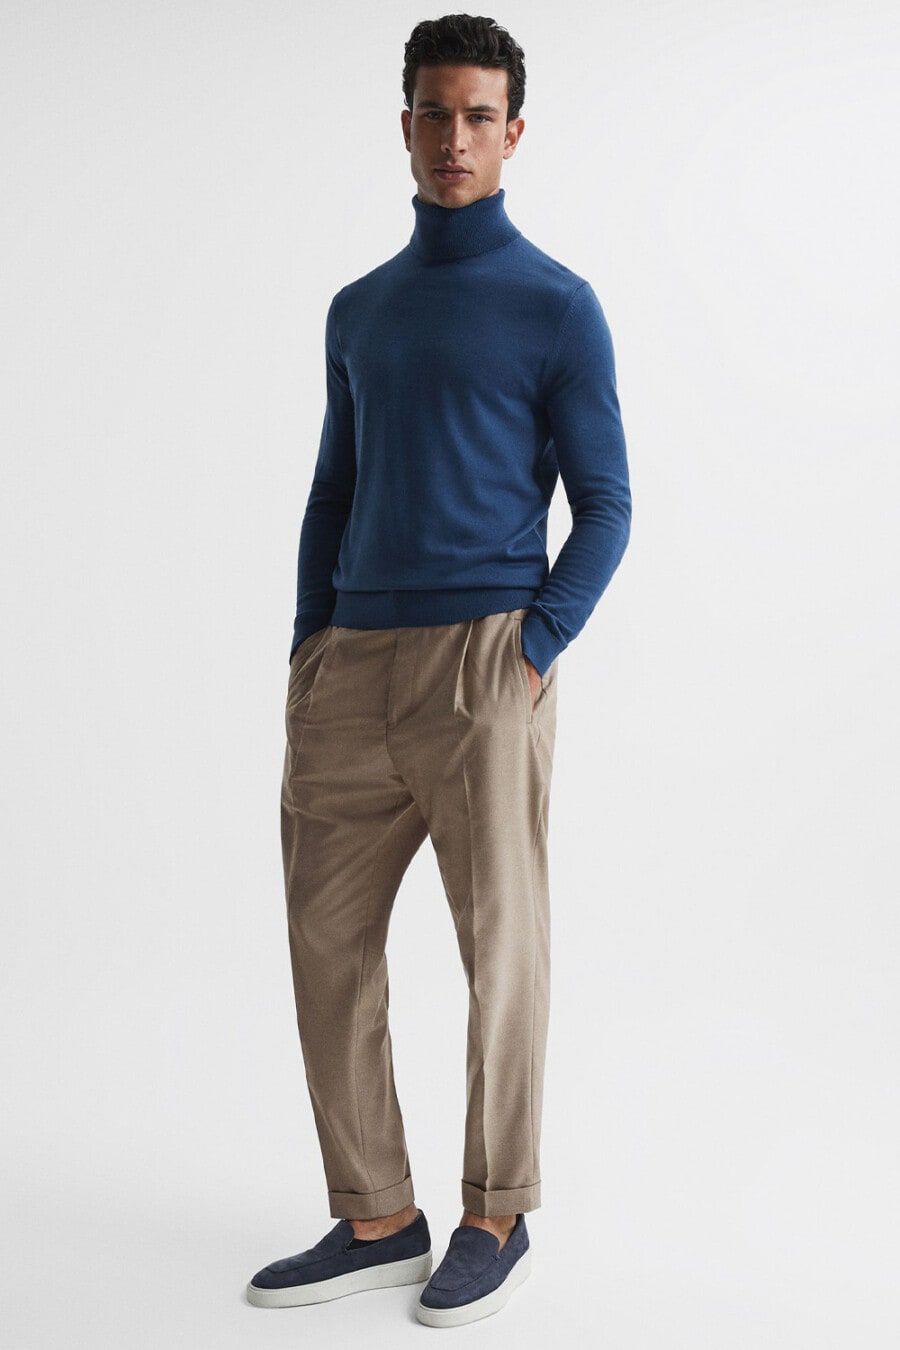 Men's pleated khaki pants, blue turtleneck and navy suede slip on shoes outfit